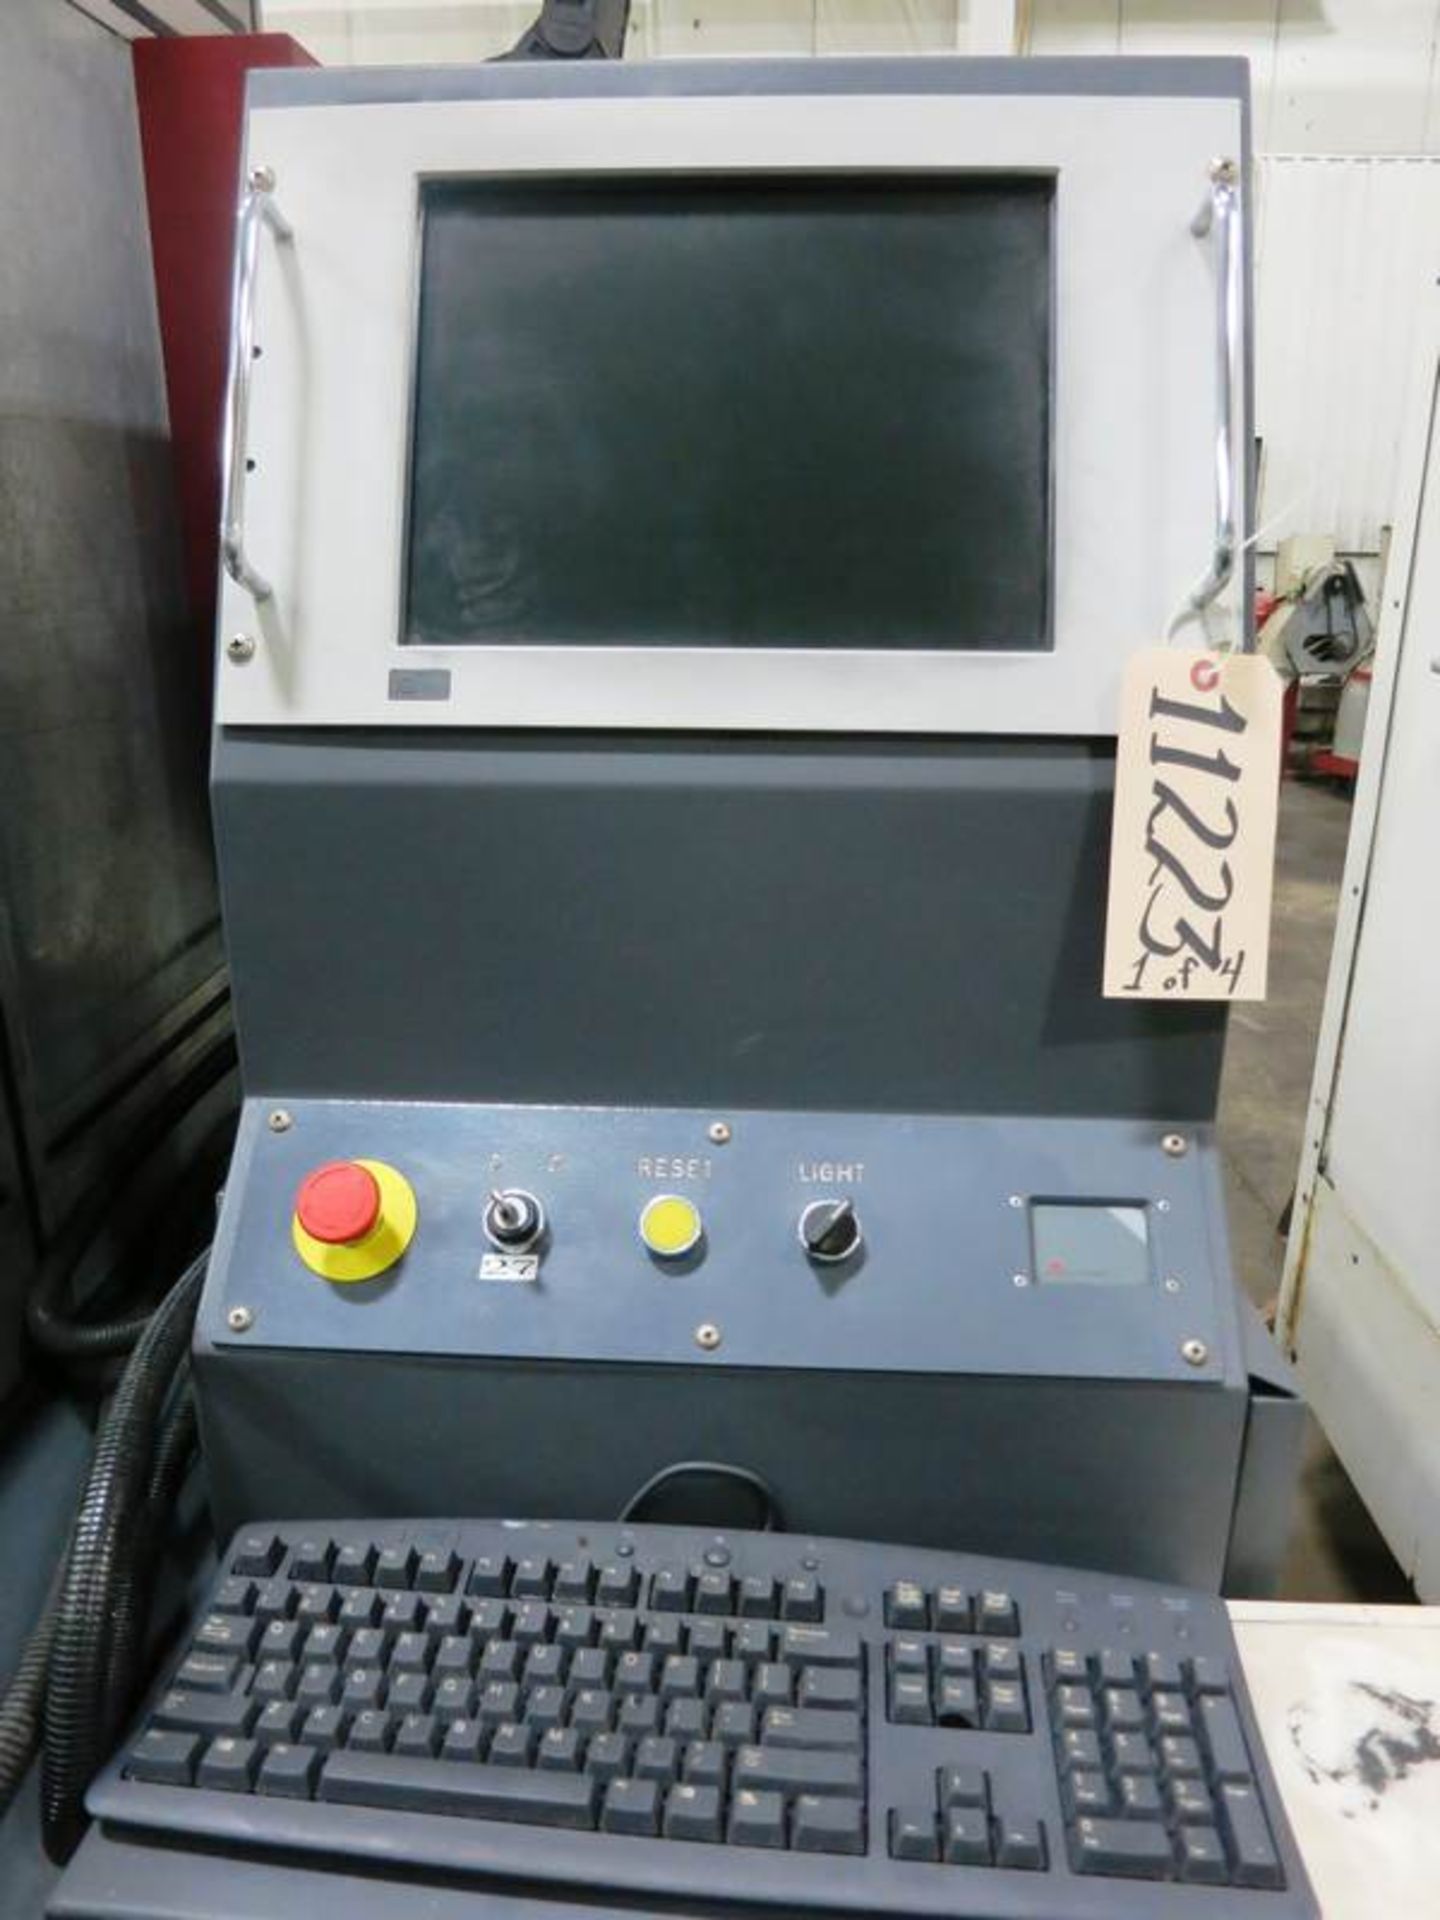 Roders Tec RFM600 CNC 3-Axis High Speed Vertical Machining Center, S/N 87995-43 - Image 2 of 9